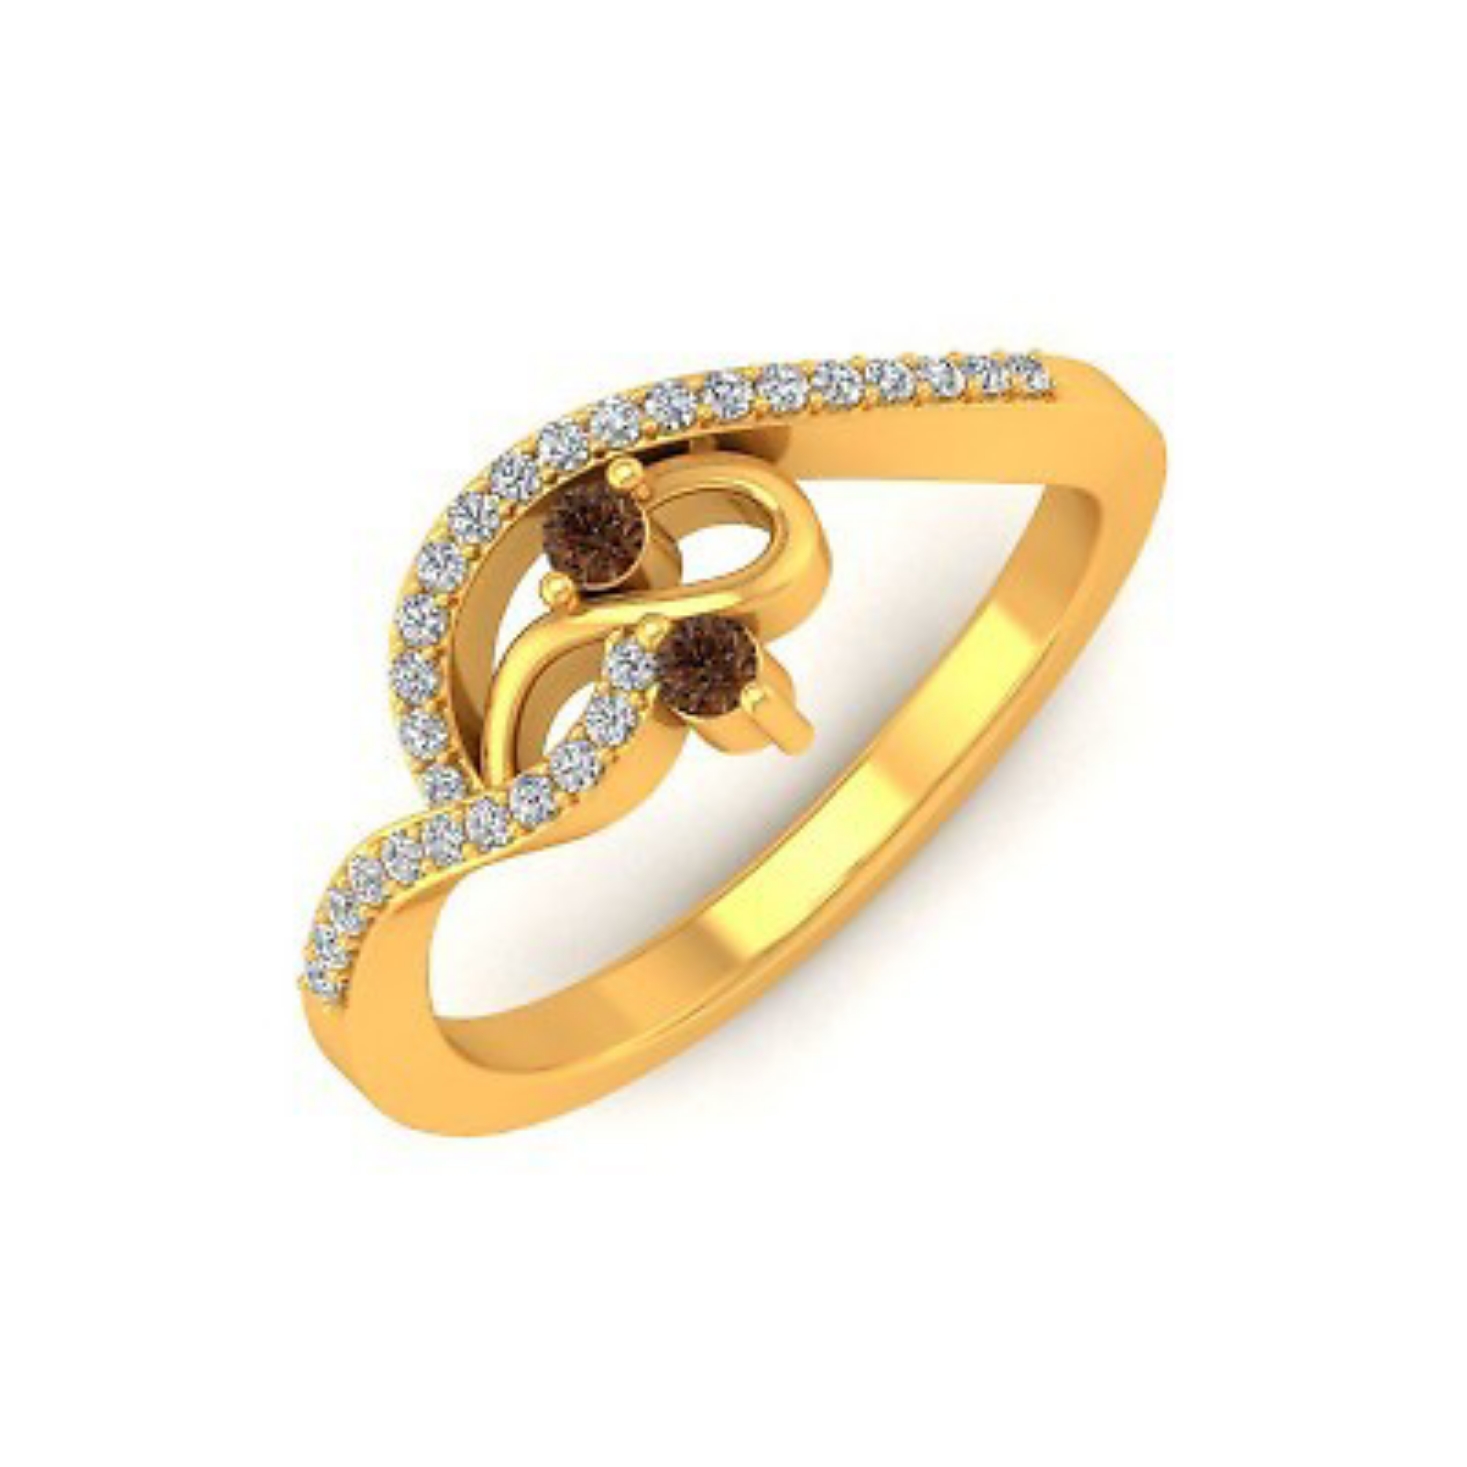 Ring Designs Images - Gold Ring Designs for Boys and Girls.  Ring Designs - Gold ring designs for girls - NeotericIT.com